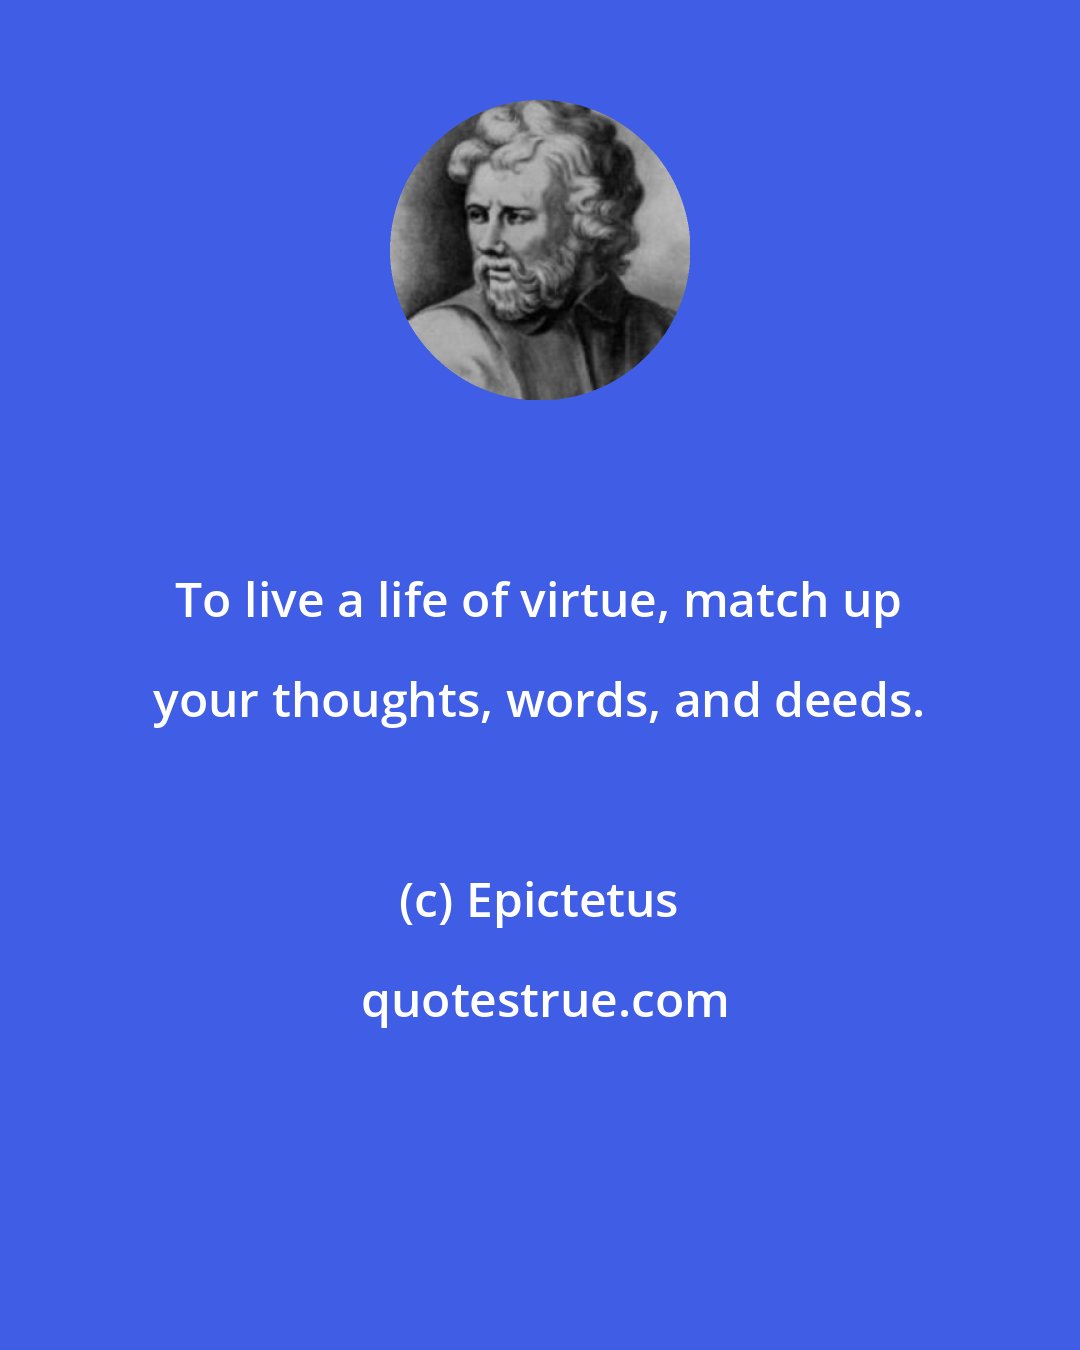 Epictetus: To live a life of virtue, match up your thoughts, words, and deeds.